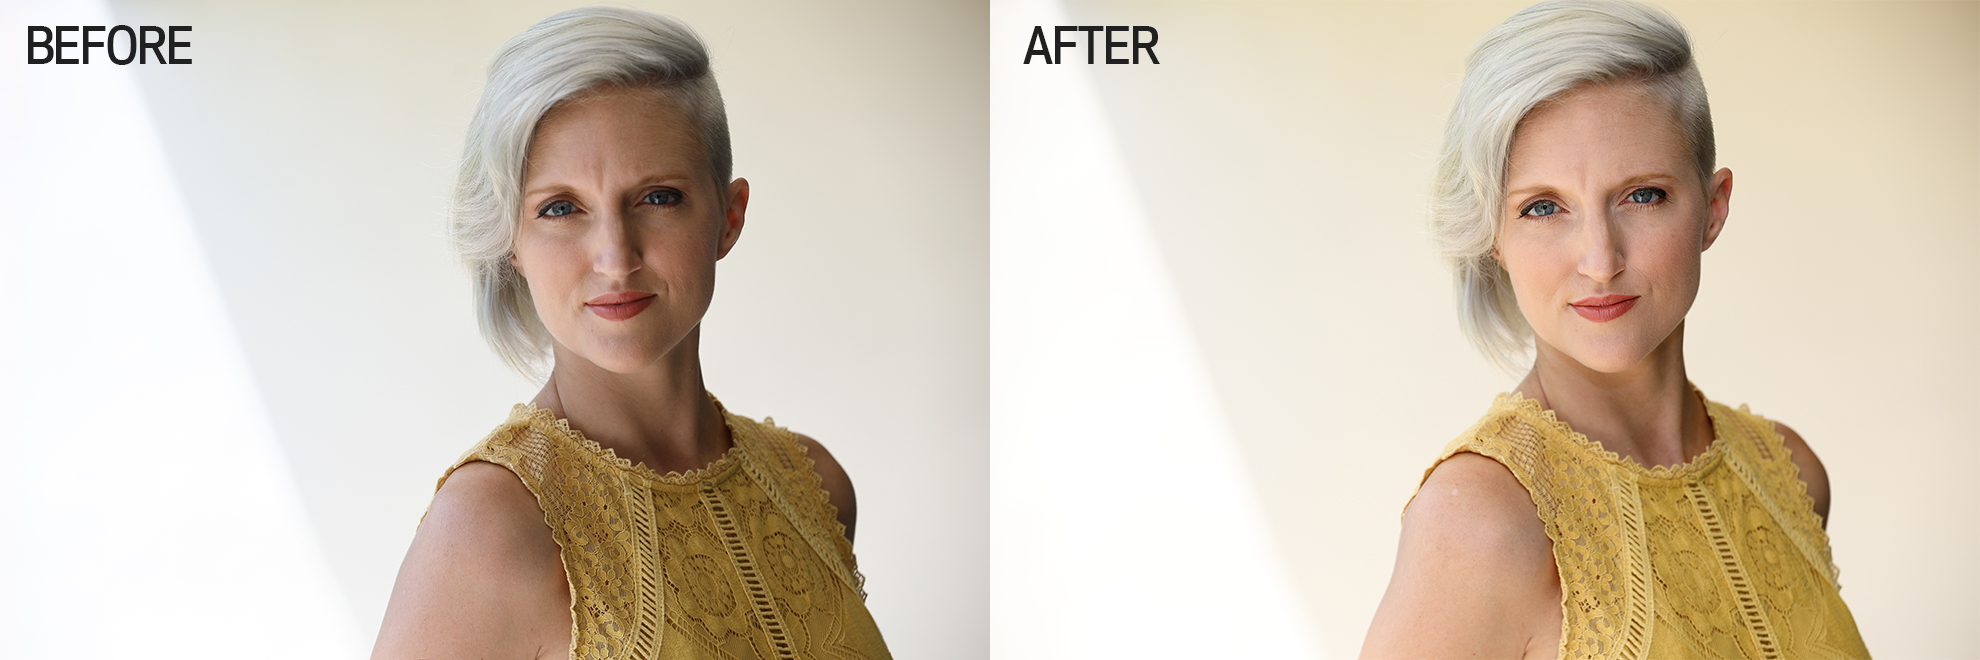 Before and After comparison of blonde model in natural sunlight to the same photo with fill light to make the model's face even brighter